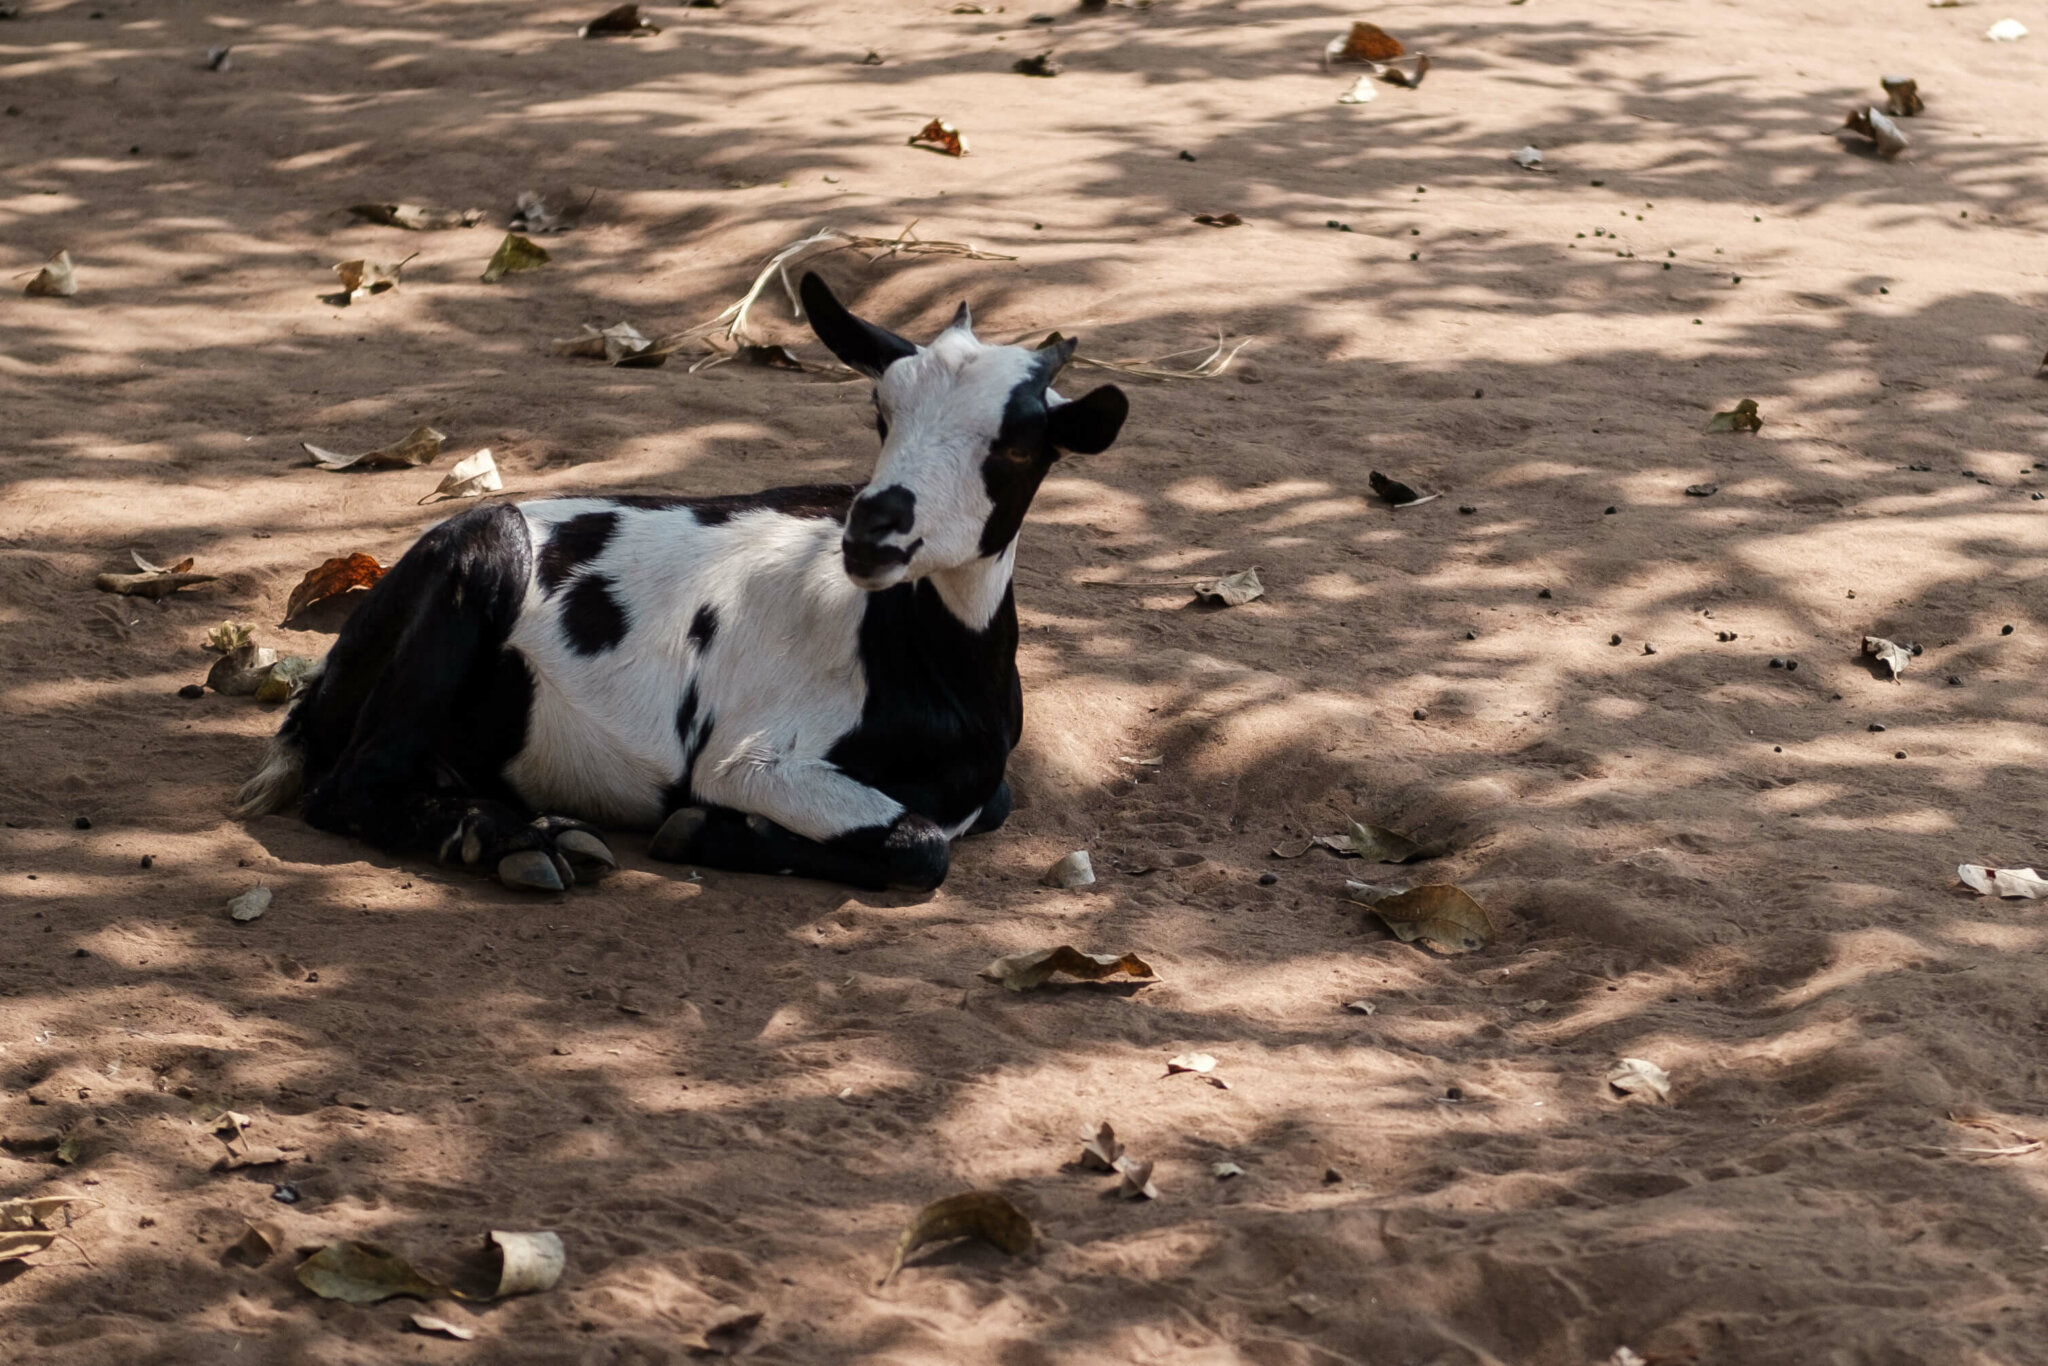 Image of a goat sitting in the shade.